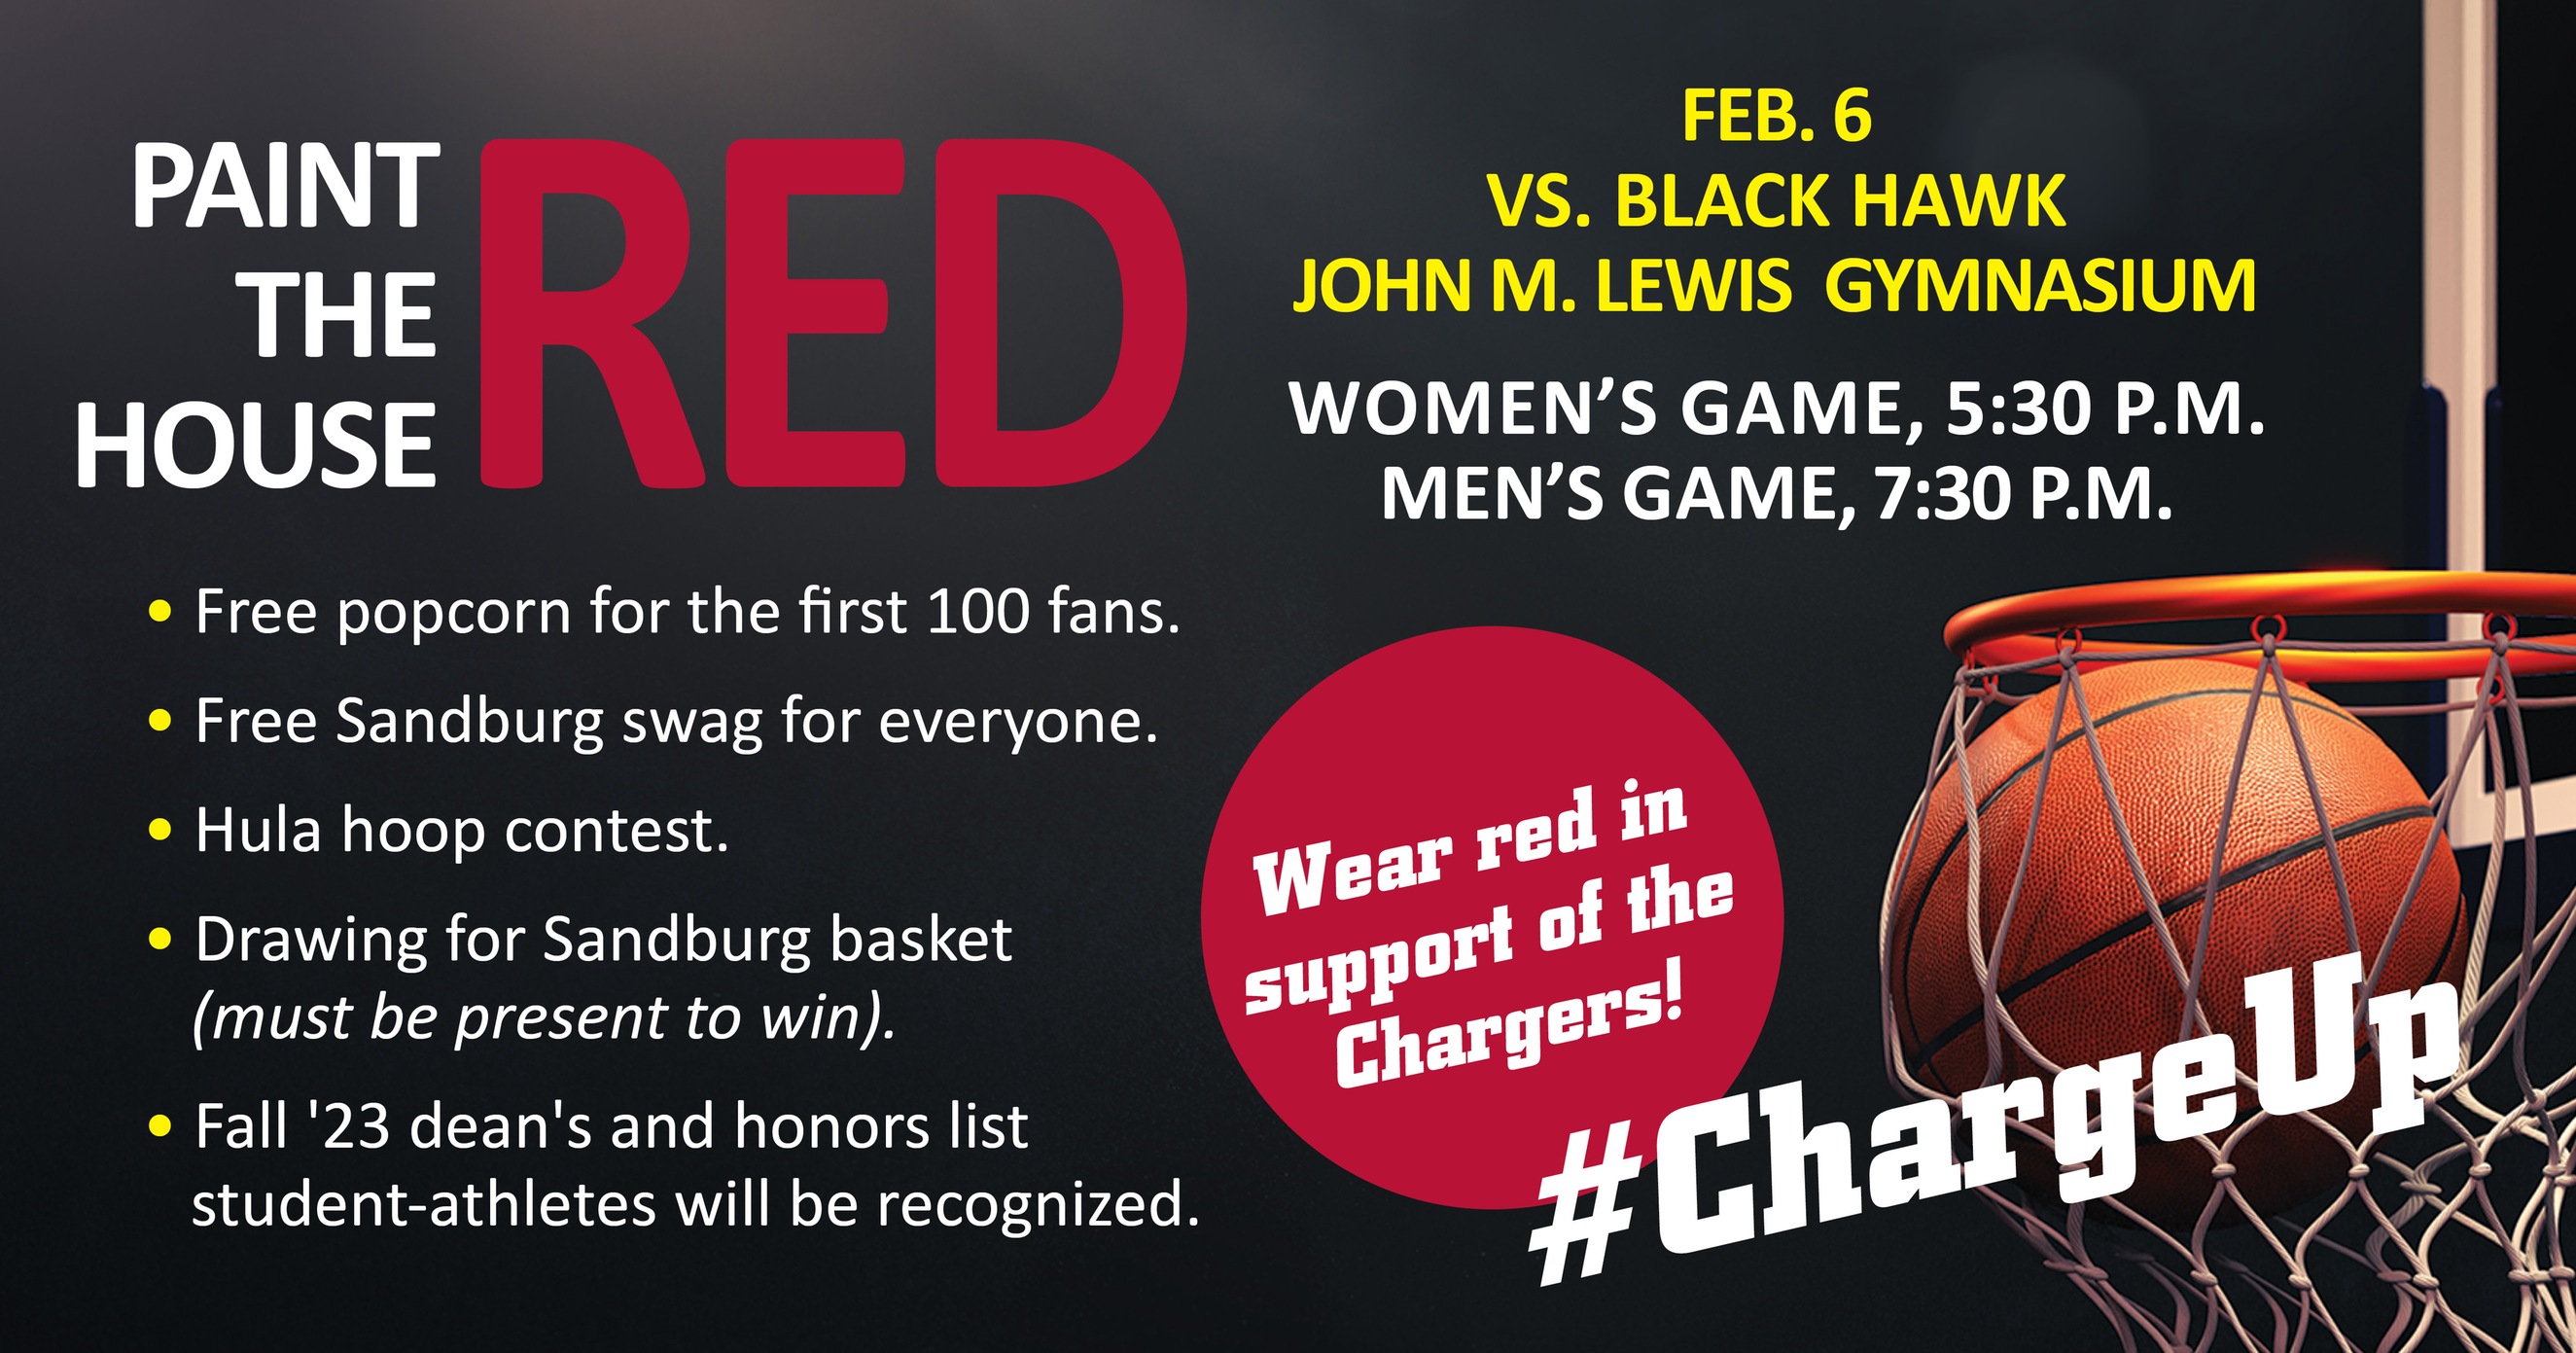 Join us Feb. 6 to Paint the House Red!